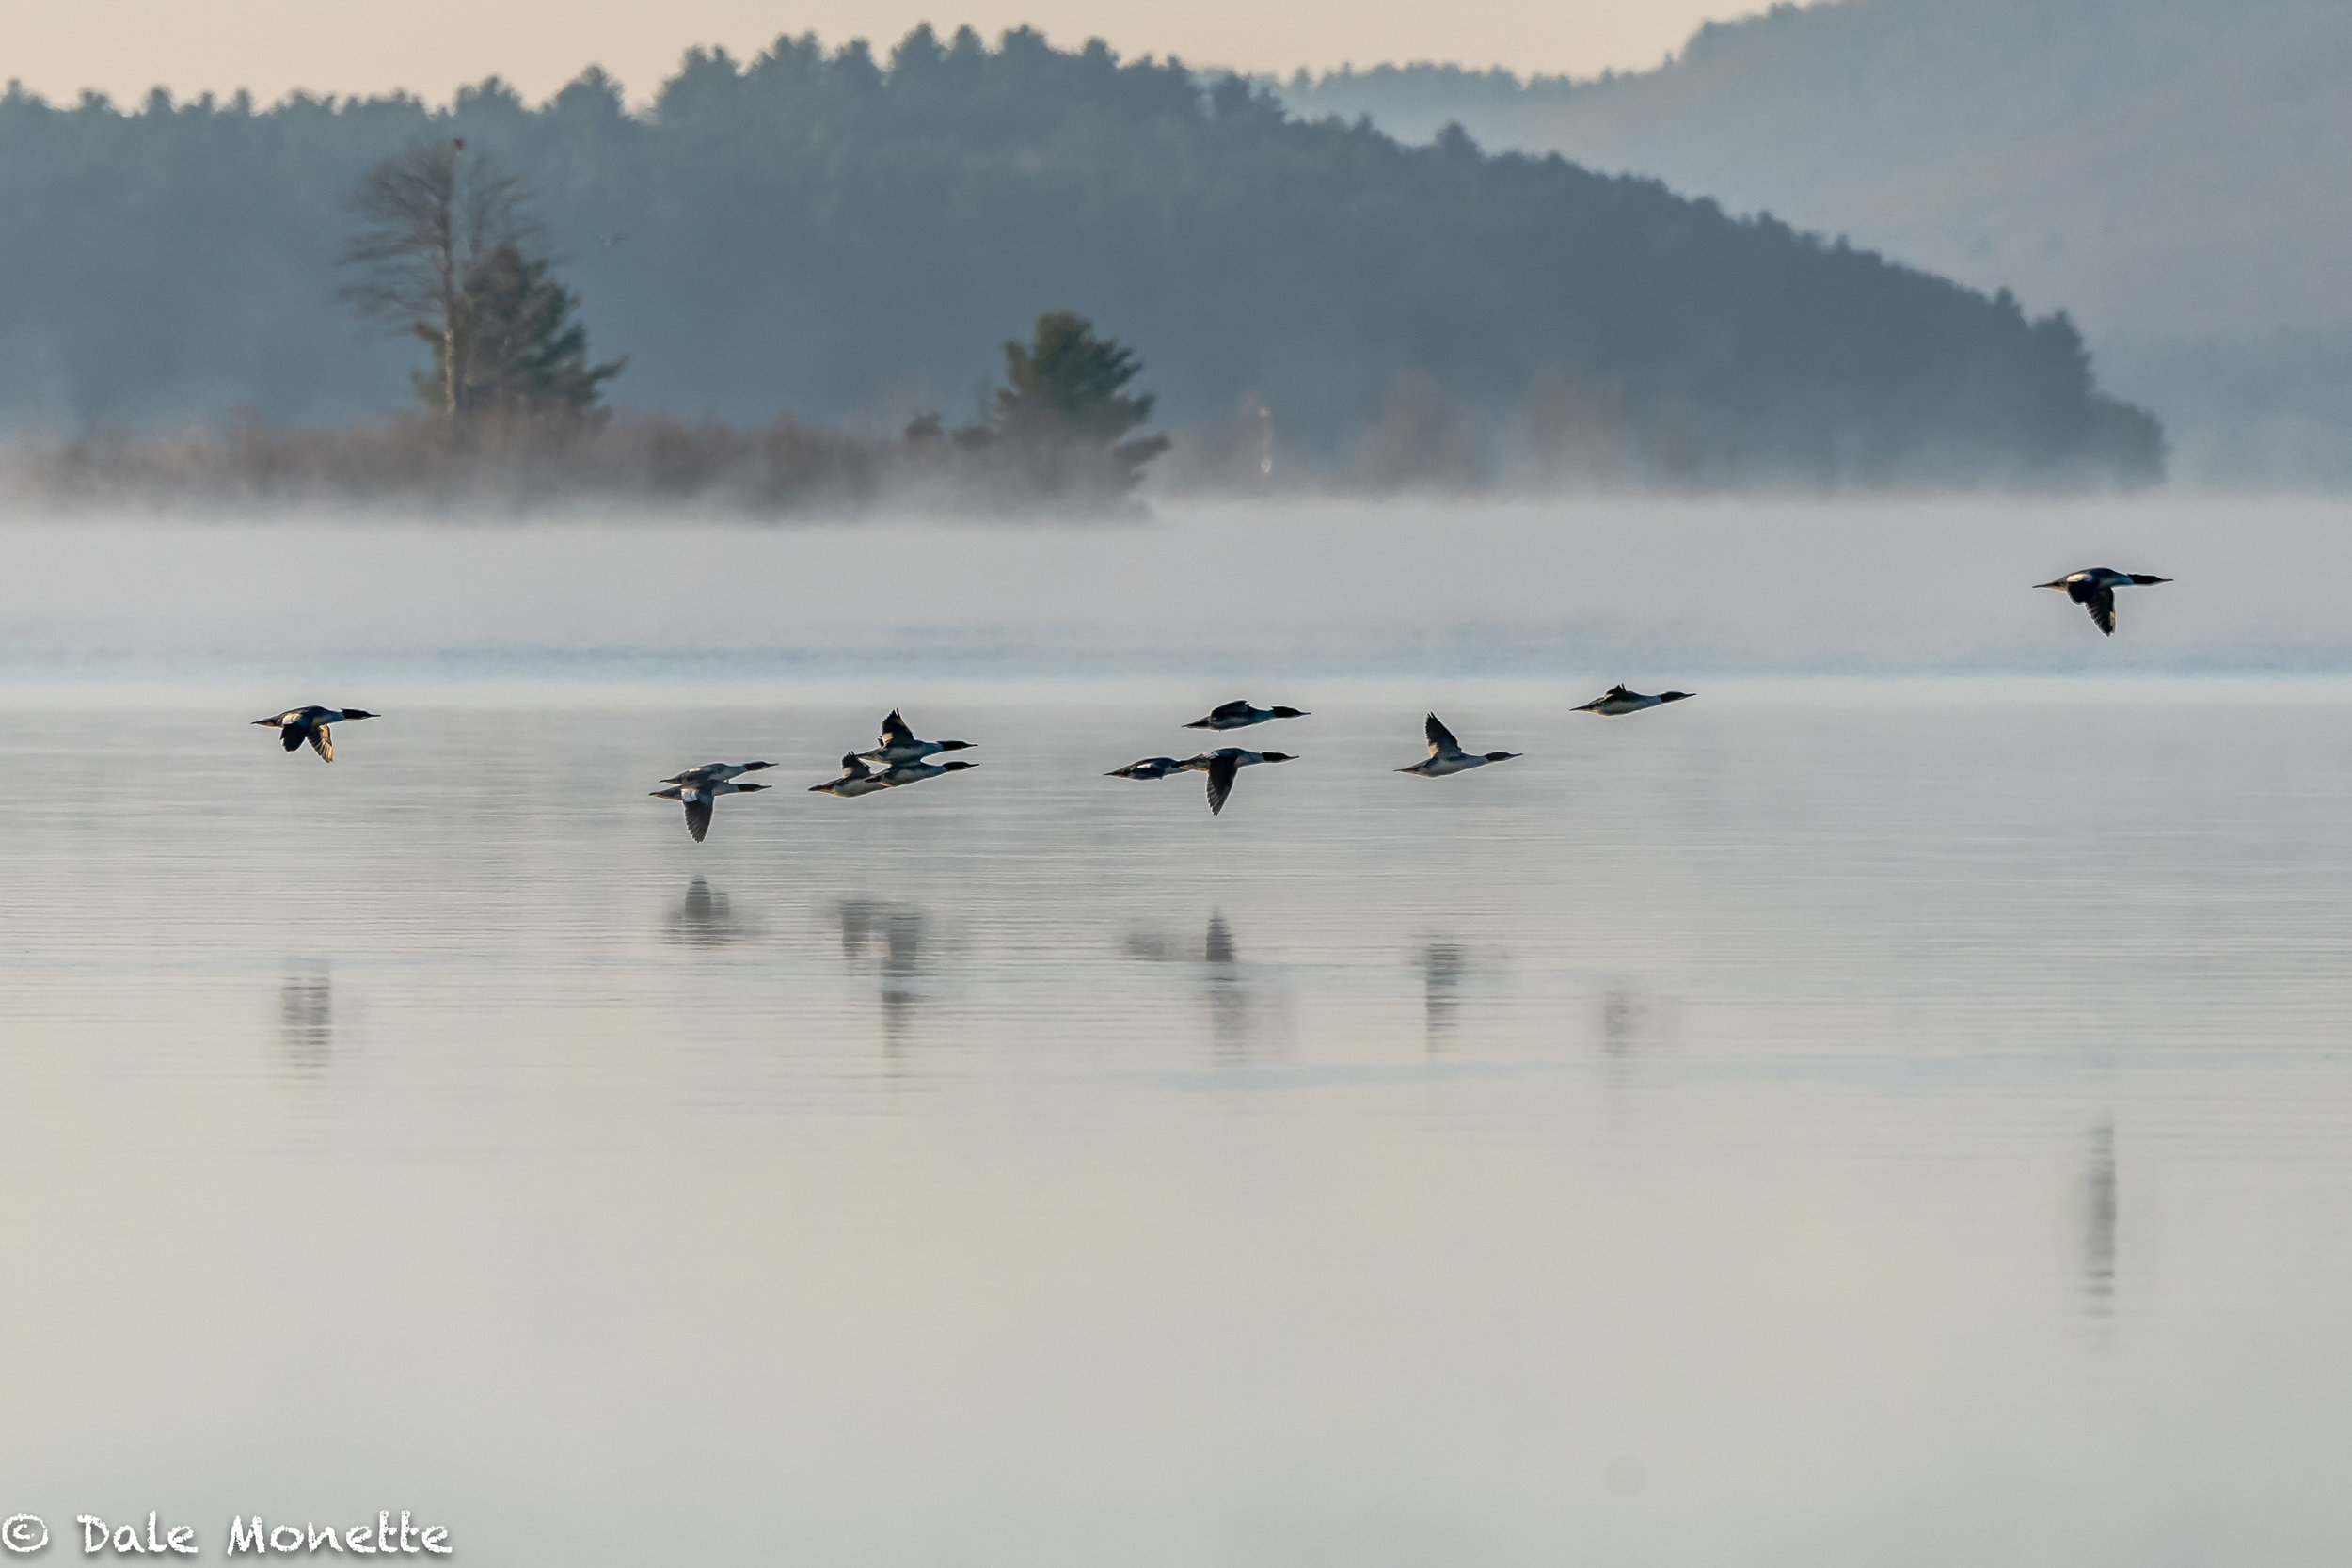   This morning at Quabbin I took this image of a flock of 12 common mergansers zipping along the surface. As I looked close at the image on my computer I noticed 2 adult bald eagles in the image also. Can you see them ?   